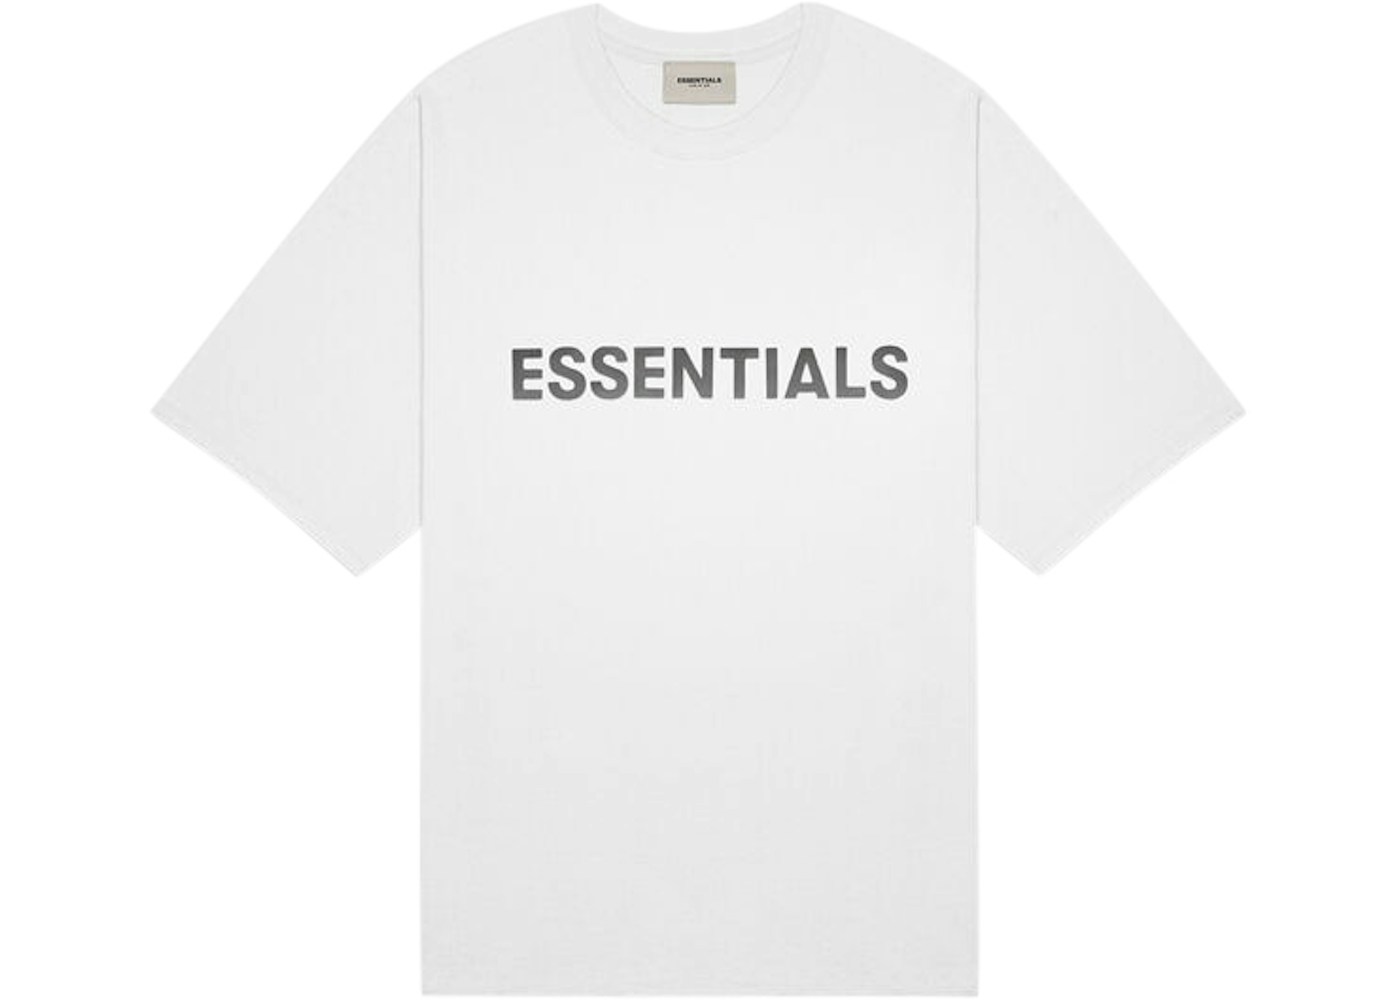 FEAR OF GOD ESSENTIALS 3D Silicon Applique Boxy T-Shirt White - SS20